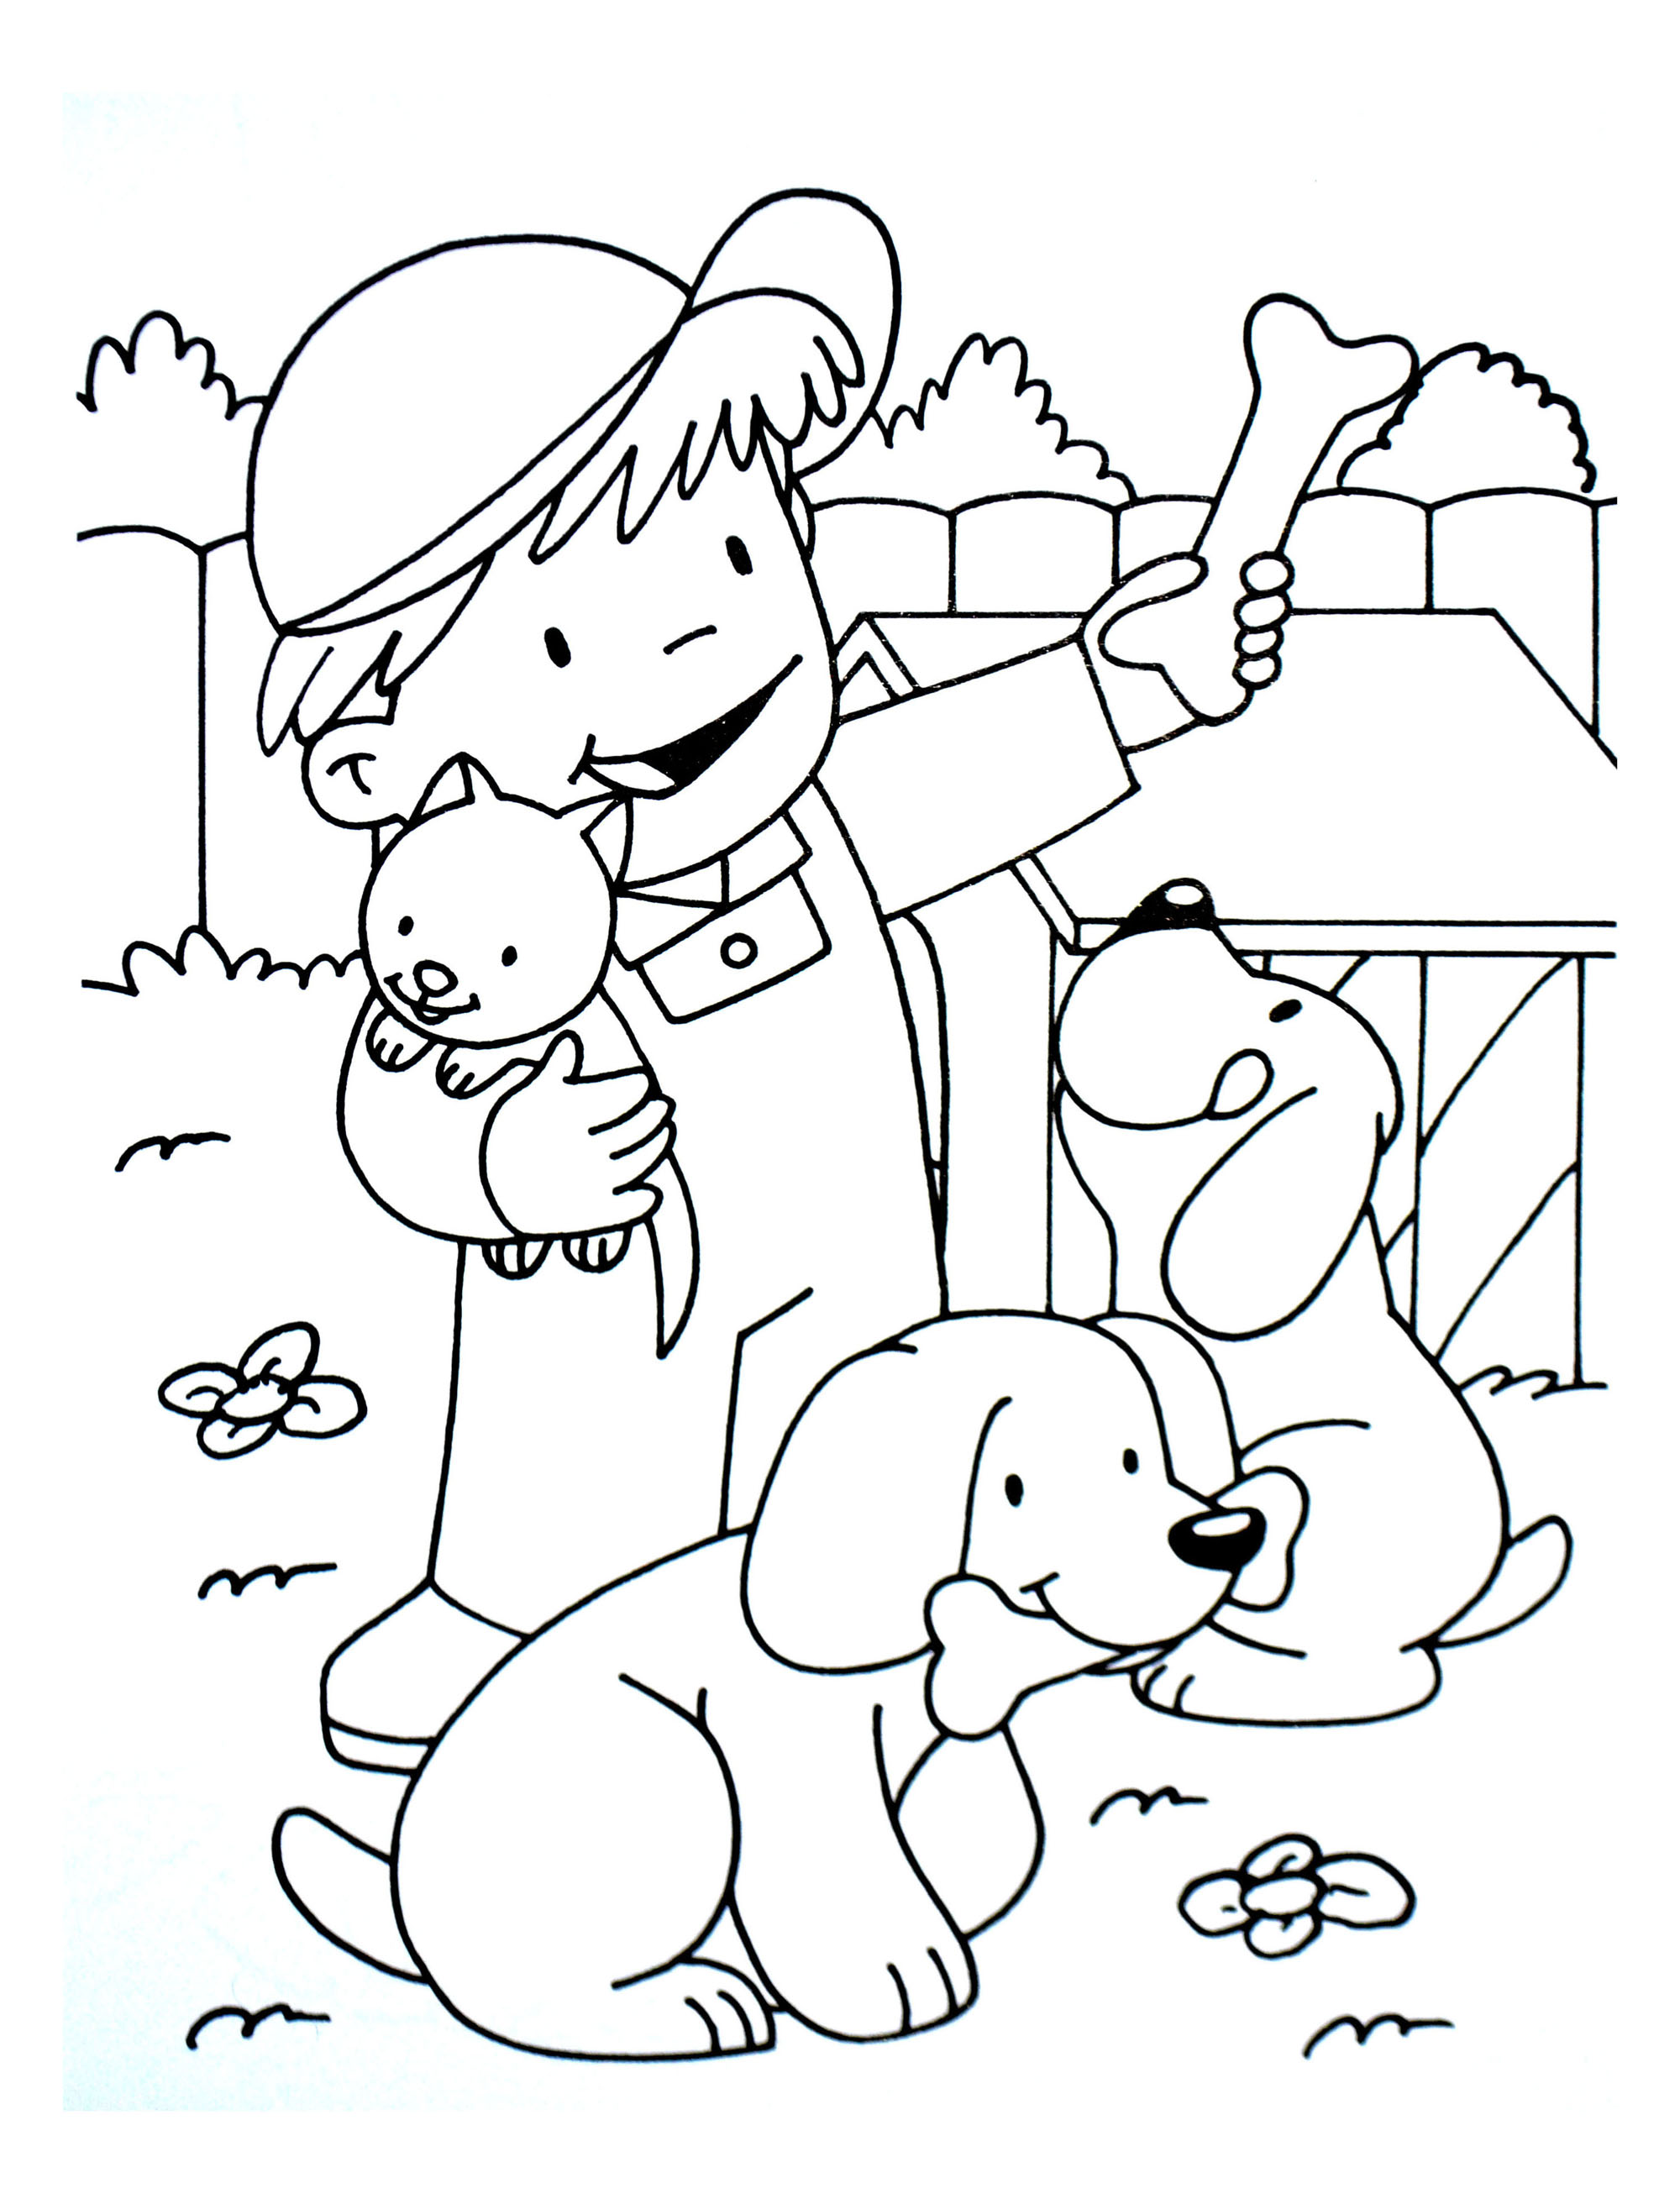 Download Farm to print - Farm Kids Coloring Pages